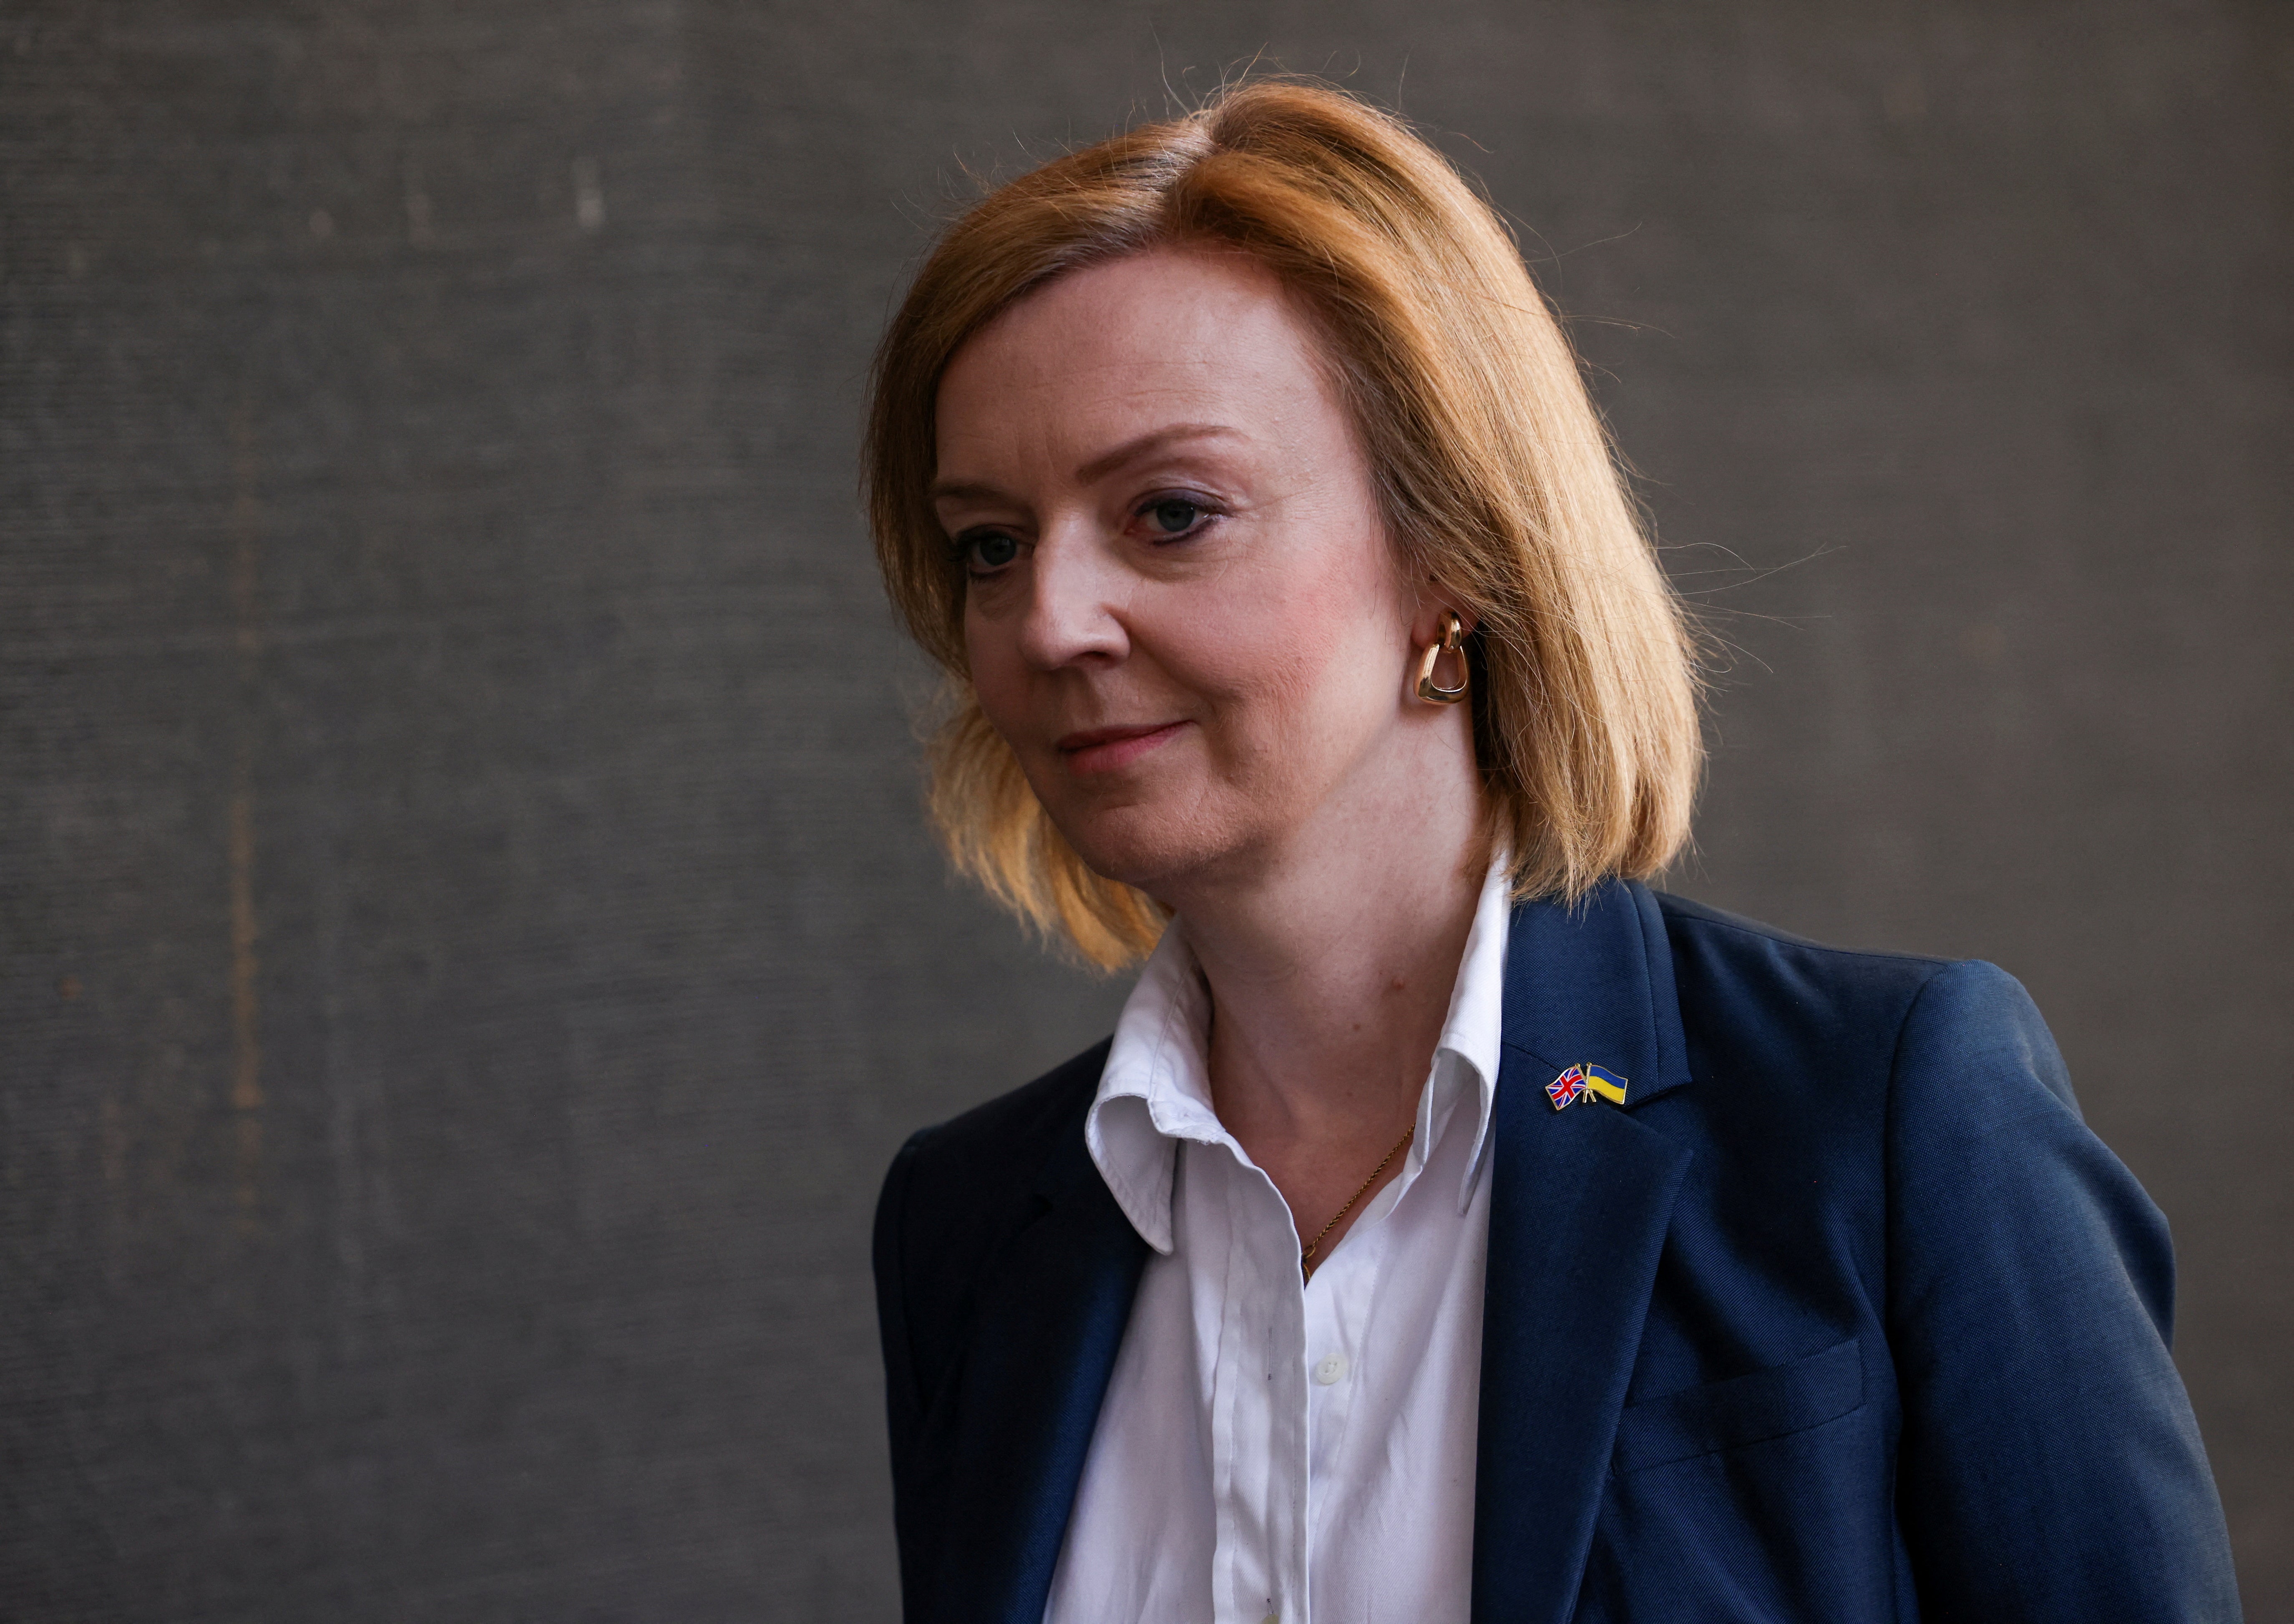 Liz Truss has earned a reputation as someone who can get a job done